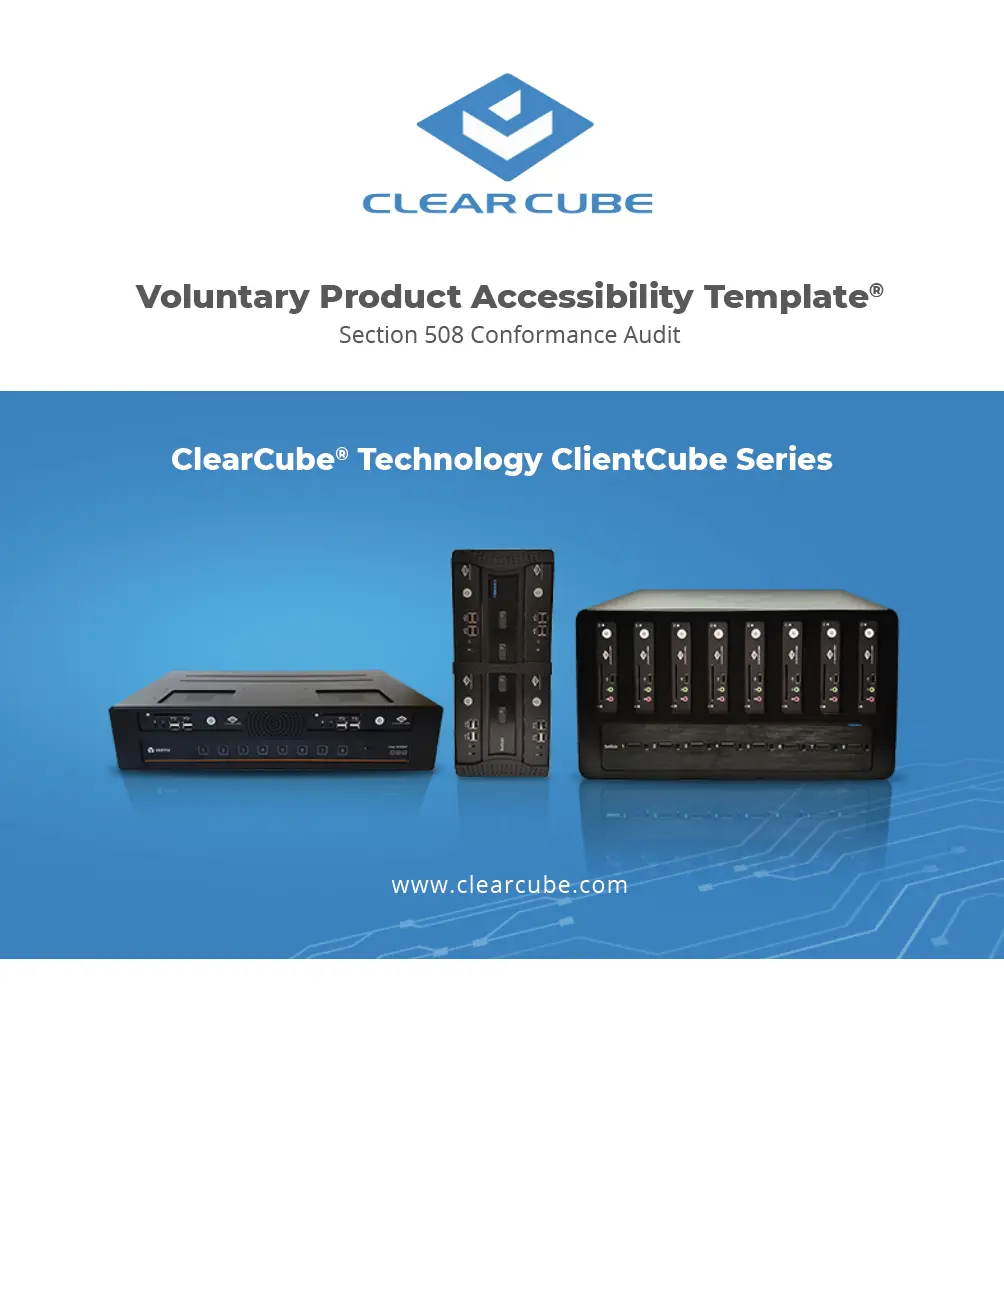 This Voluntary Product Accessibility Template (VPAT) provides guidance on the accessibility characteristics of ClearCube ClientCubes and KVM Solutions